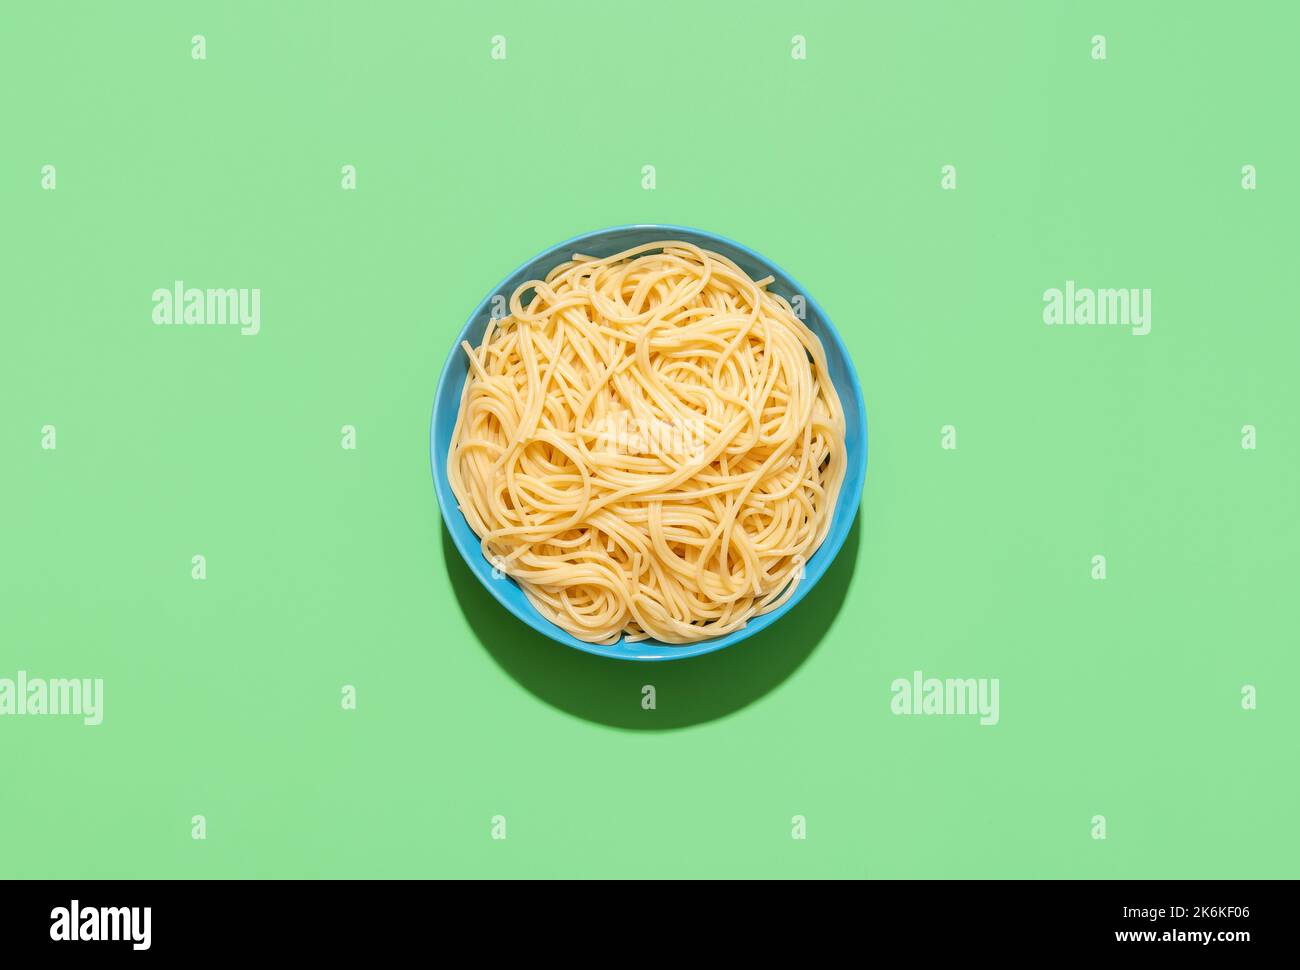 Above view with a blue plate with spaghetti minimalist on a green table. Spaghetti without sauce in bright light on a colorful background Stock Photo